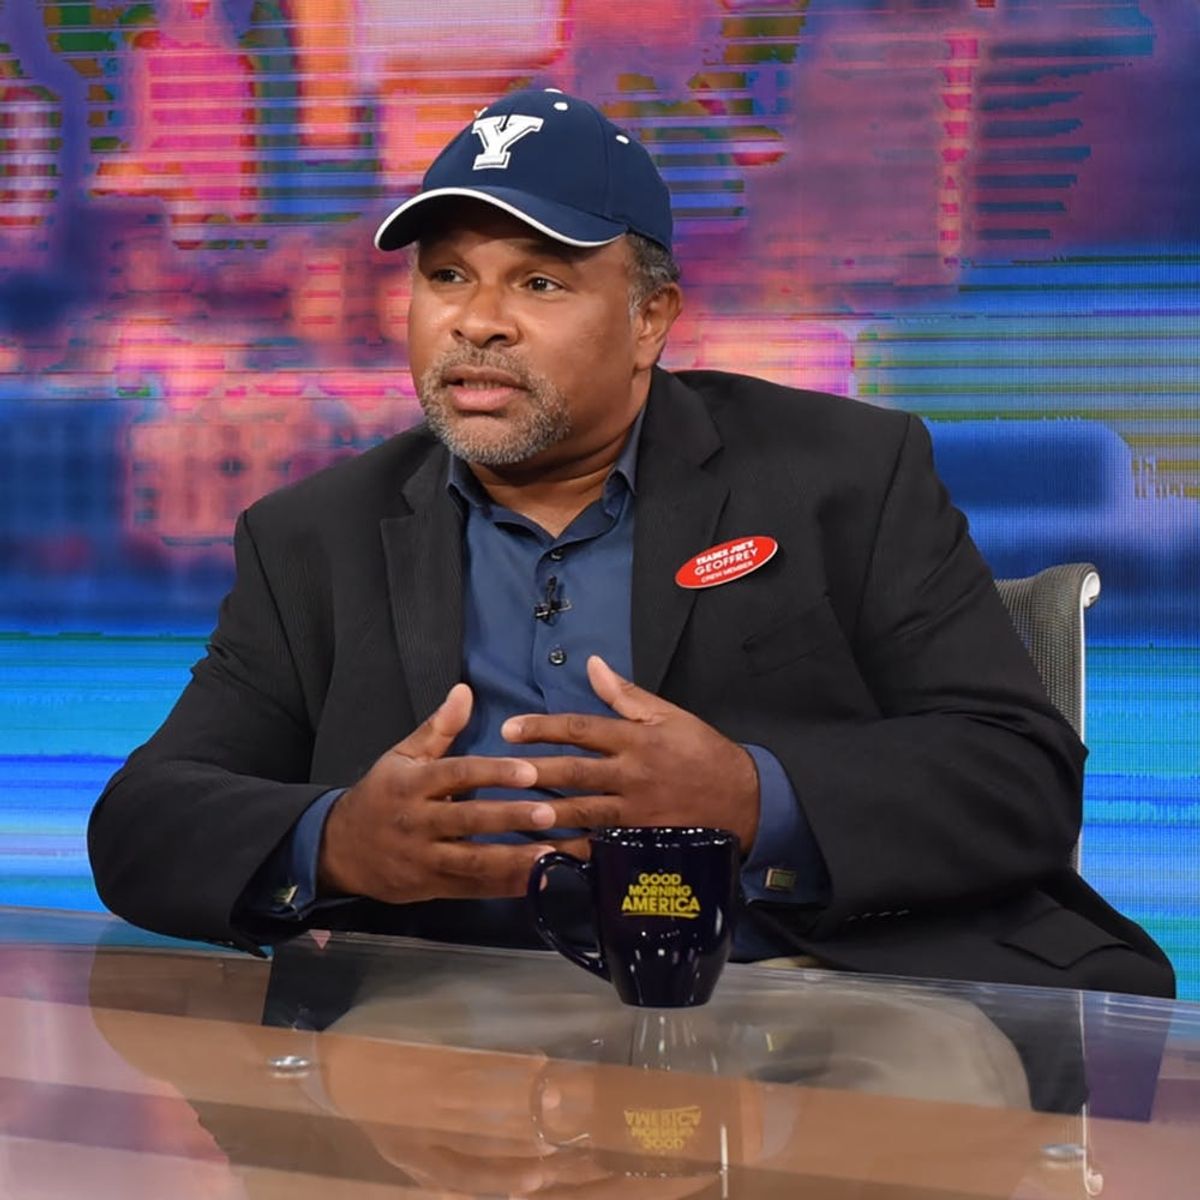 ‘Cosby Show’ Actor Geoffrey Owens Had the Best Response to Being Shamed for His Grocery Job